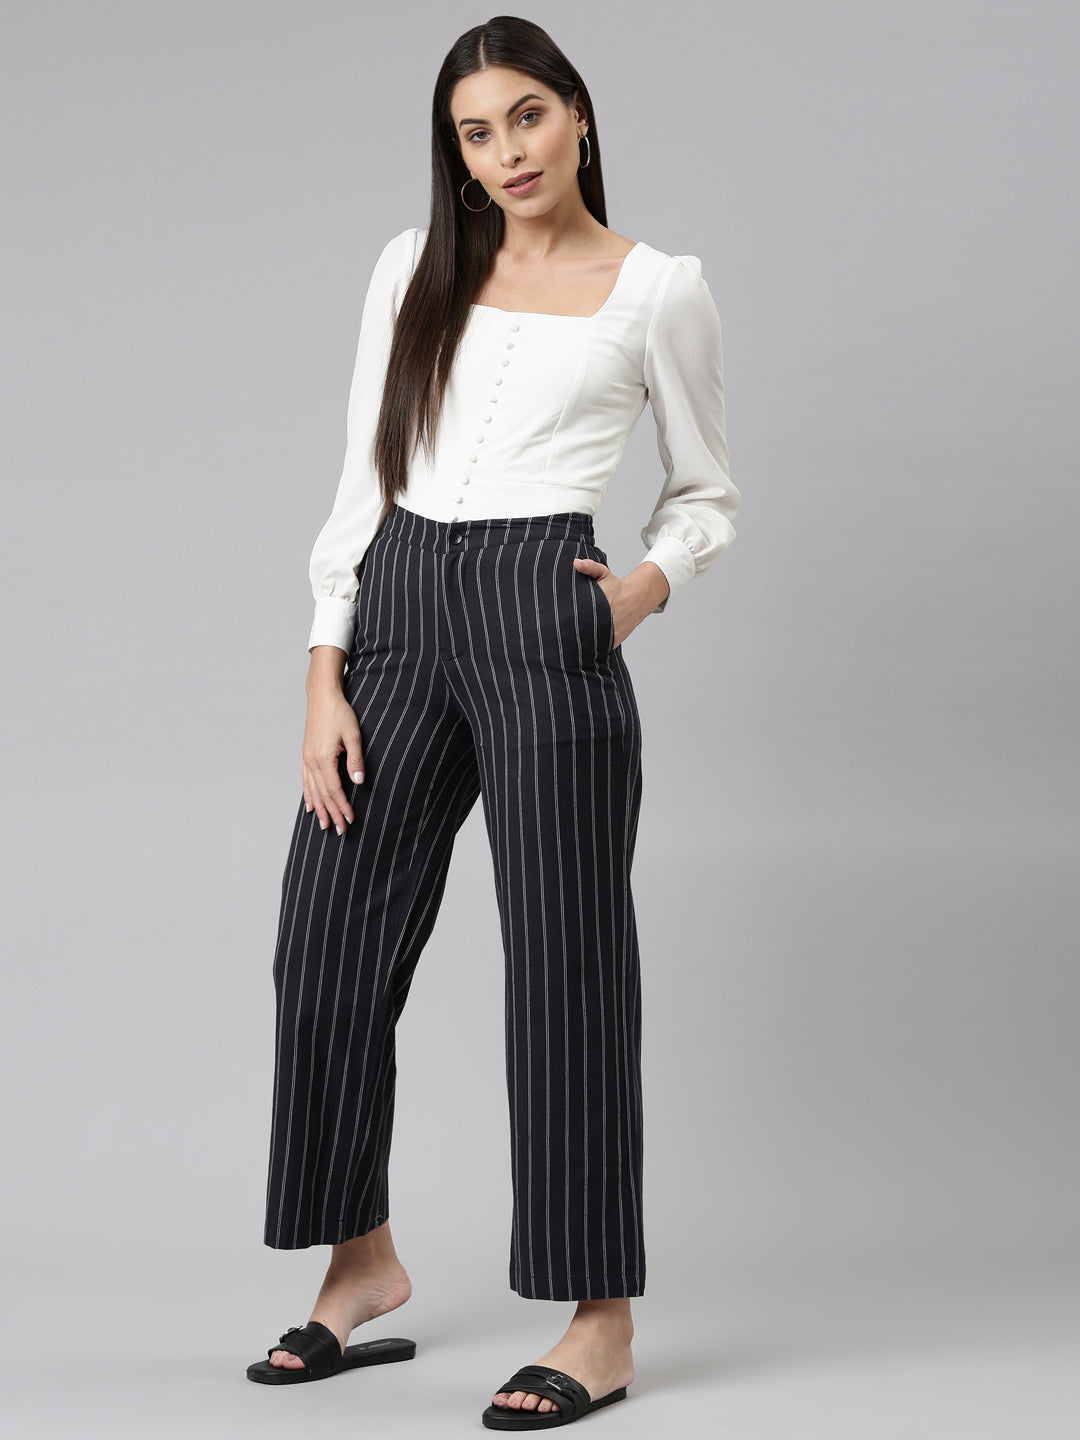 Striped Pants For Women